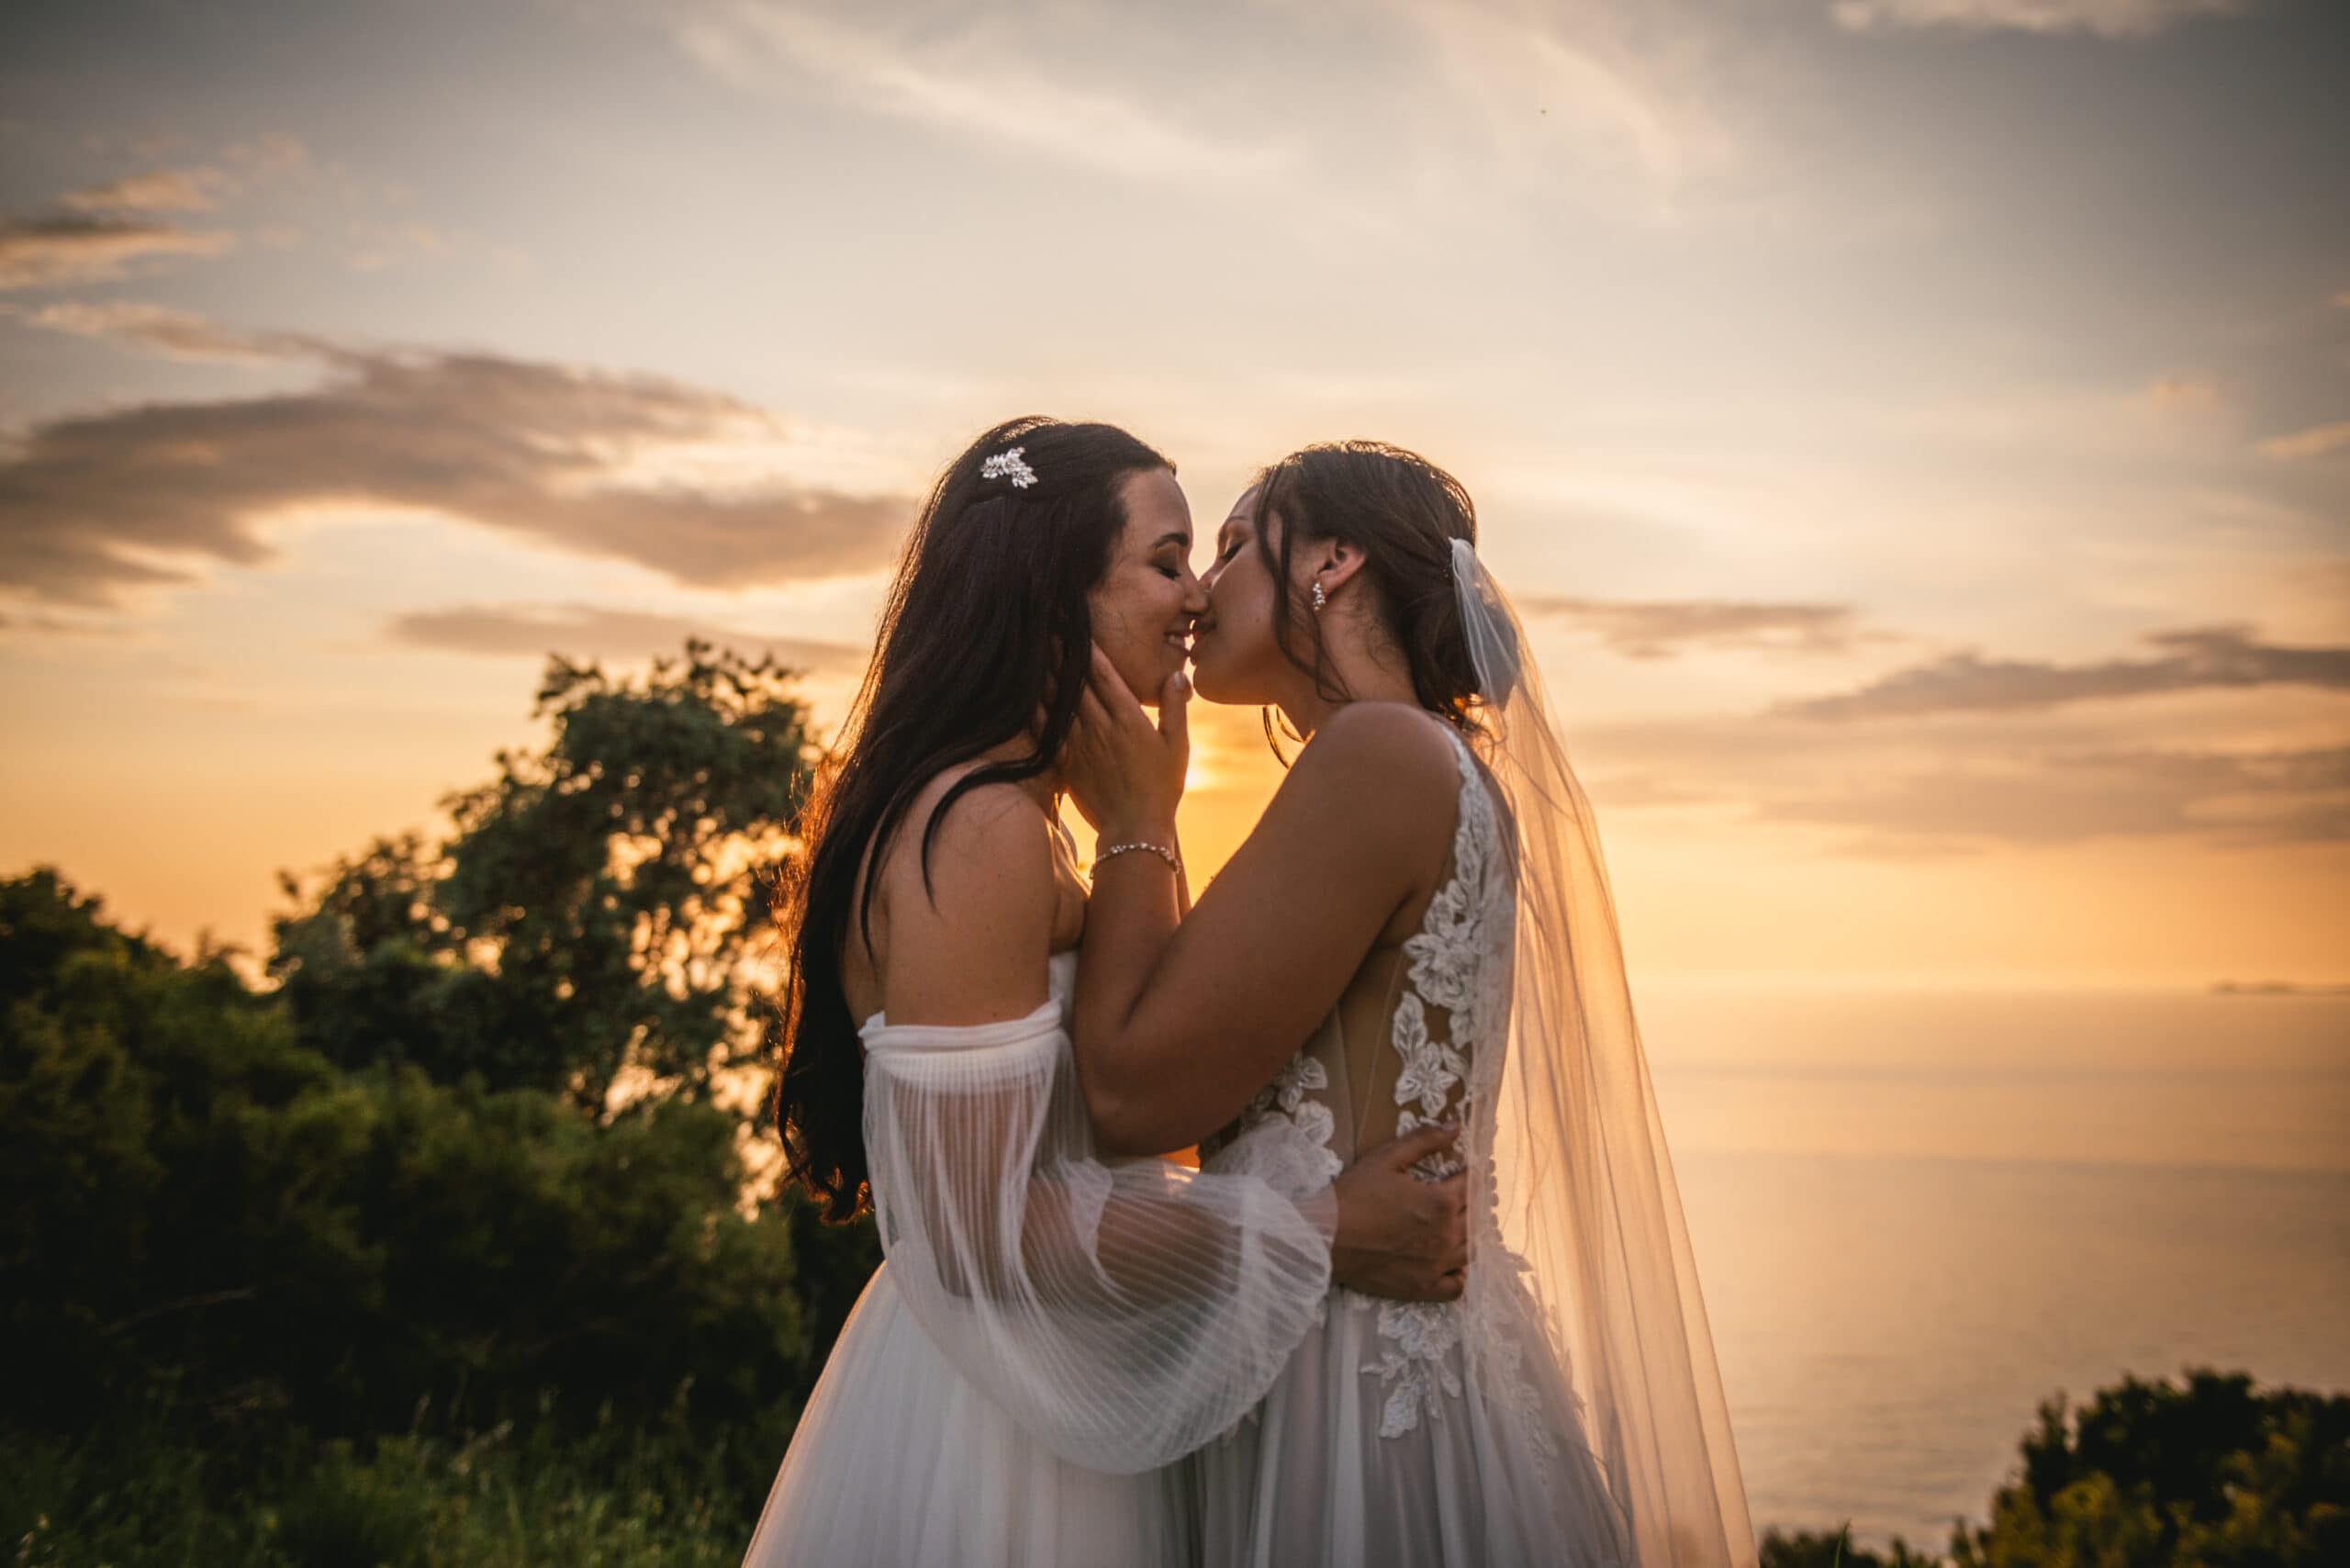 Brides sharing a tender kiss on a cliff, love's height in their Corfu elopement.